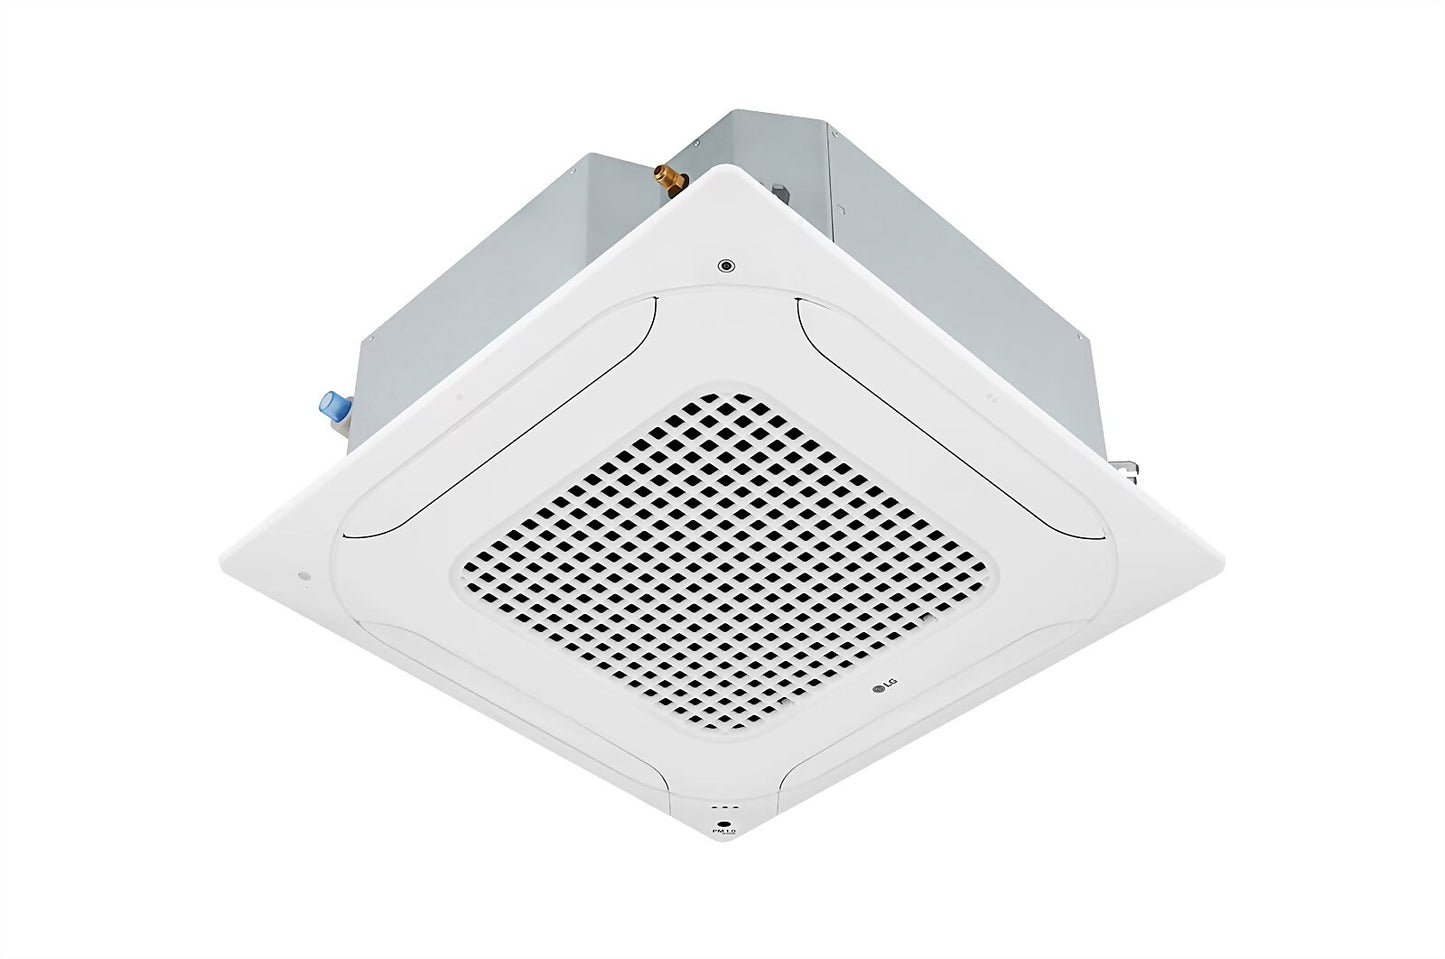 LG Ceiling Mounted 4 Way Cassette Inverter AC 6.0KW with Advanced Air Purification and Independent Vane Control - ARNU21GTQD4